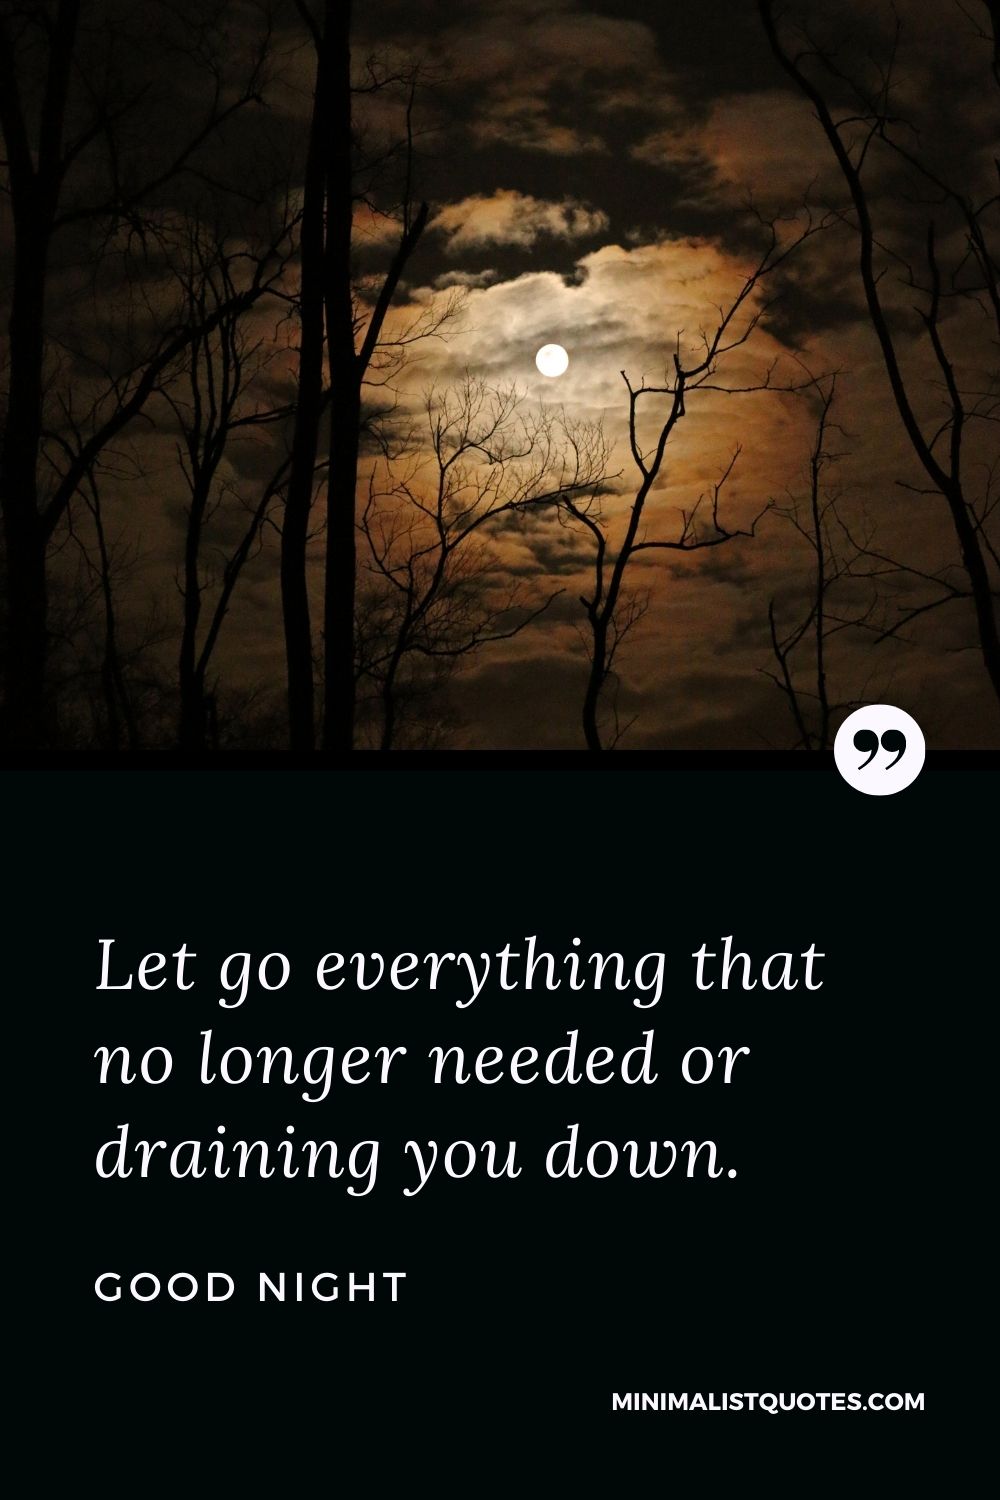 Good Night Wishes - Let go everything that no longer needed or draining you down.